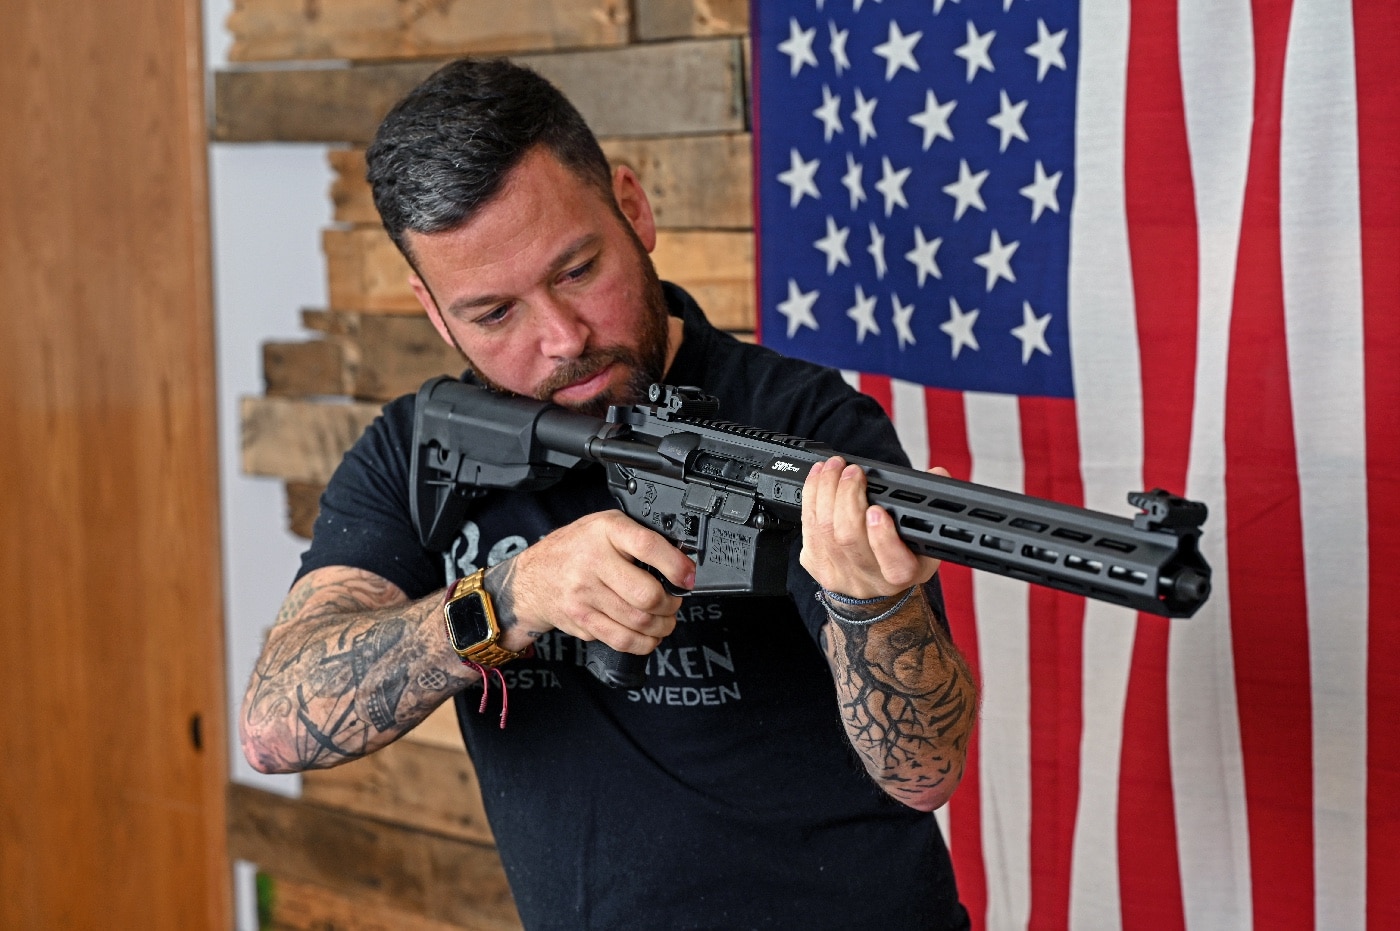 In this photo, we see the author function testing his semi-automatic rifle after cleaning it.